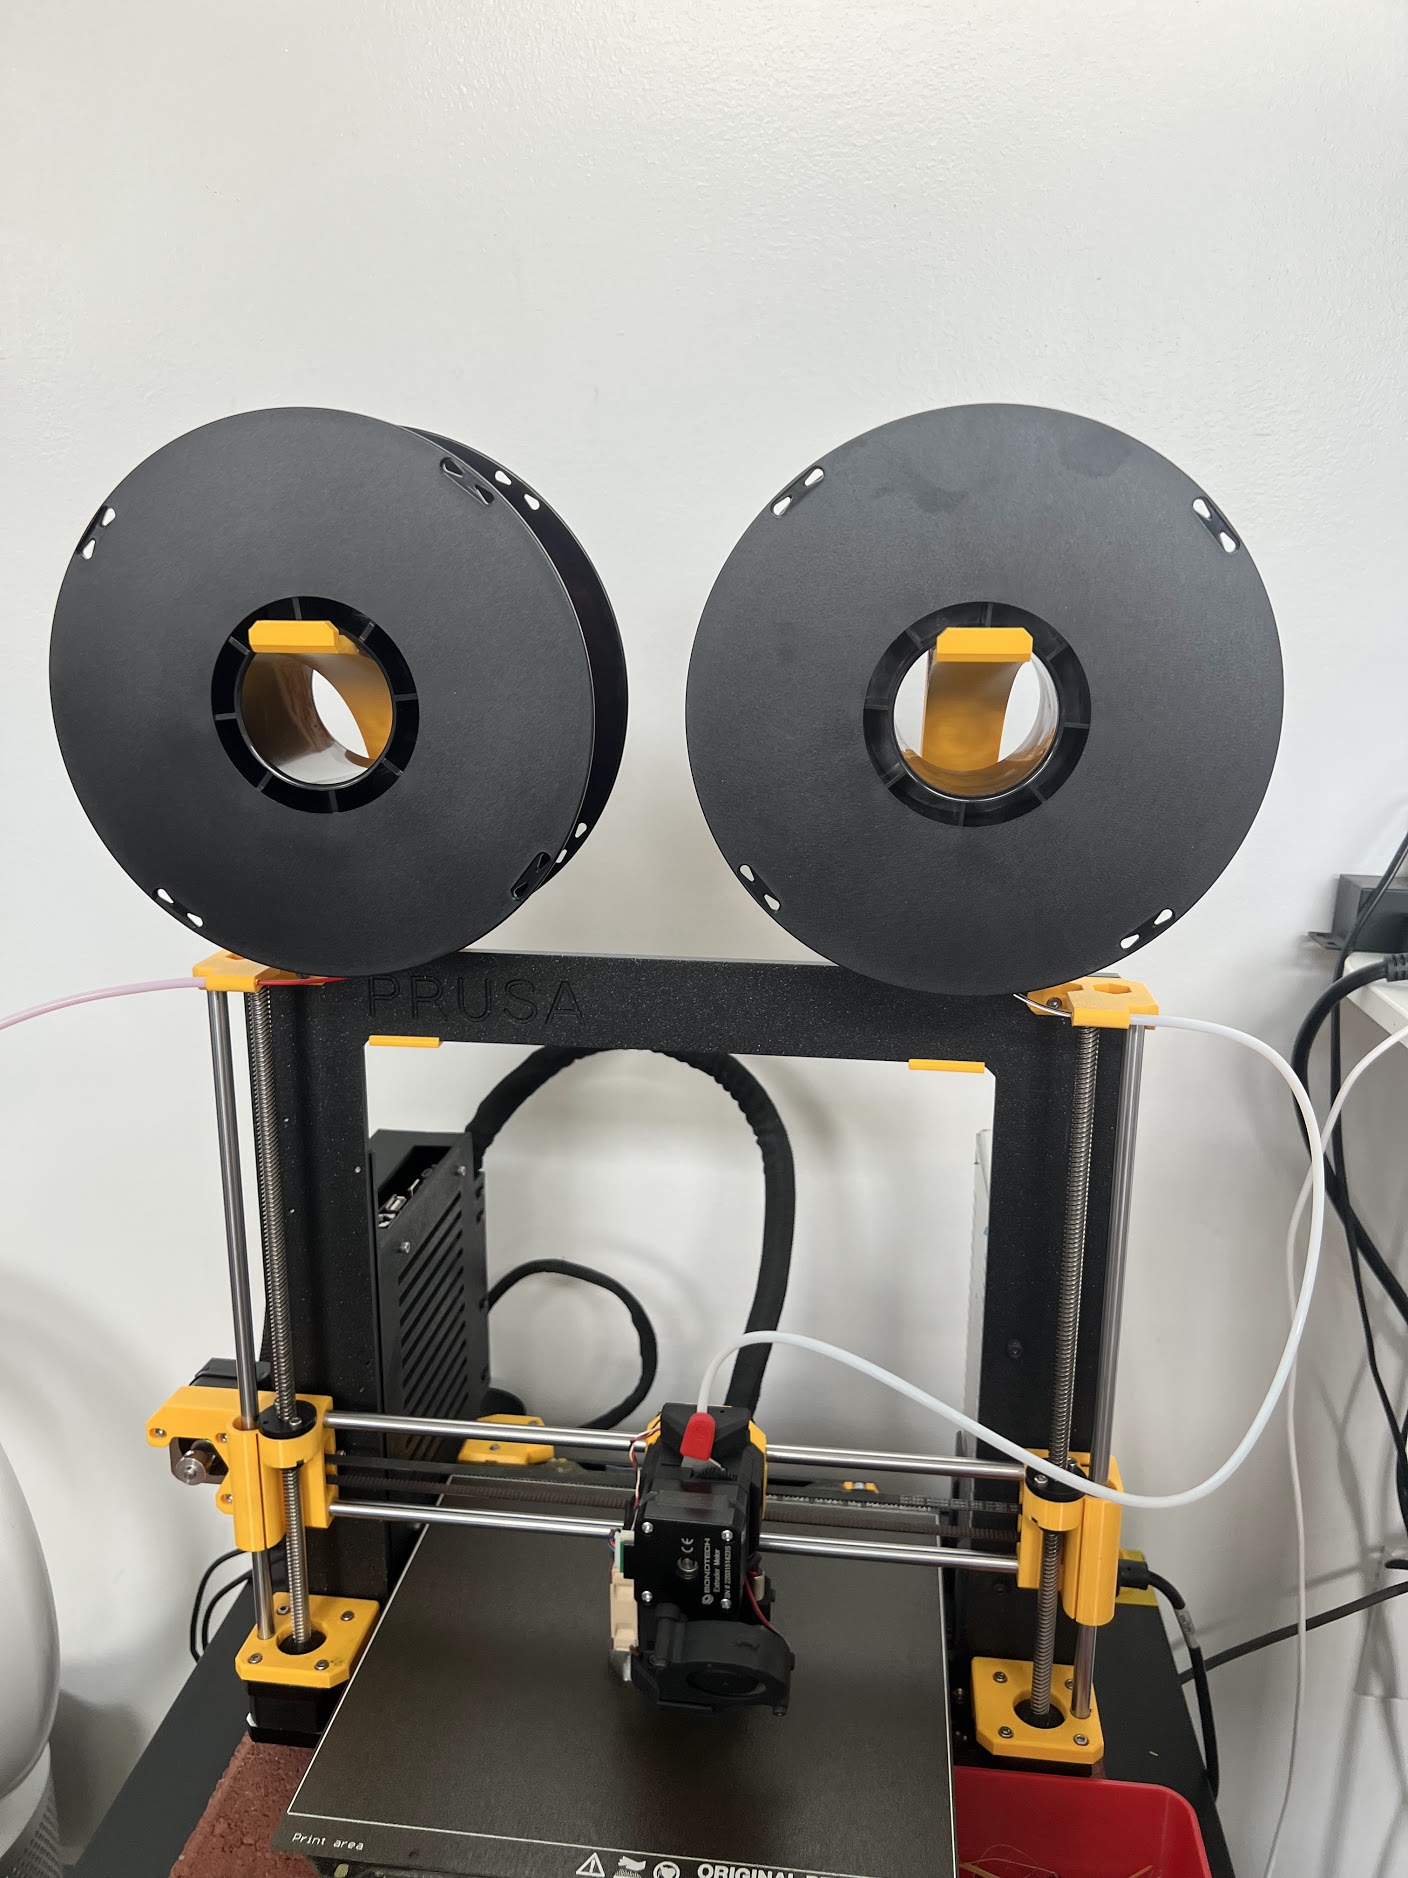 yet another cool Prusa MK spool holder